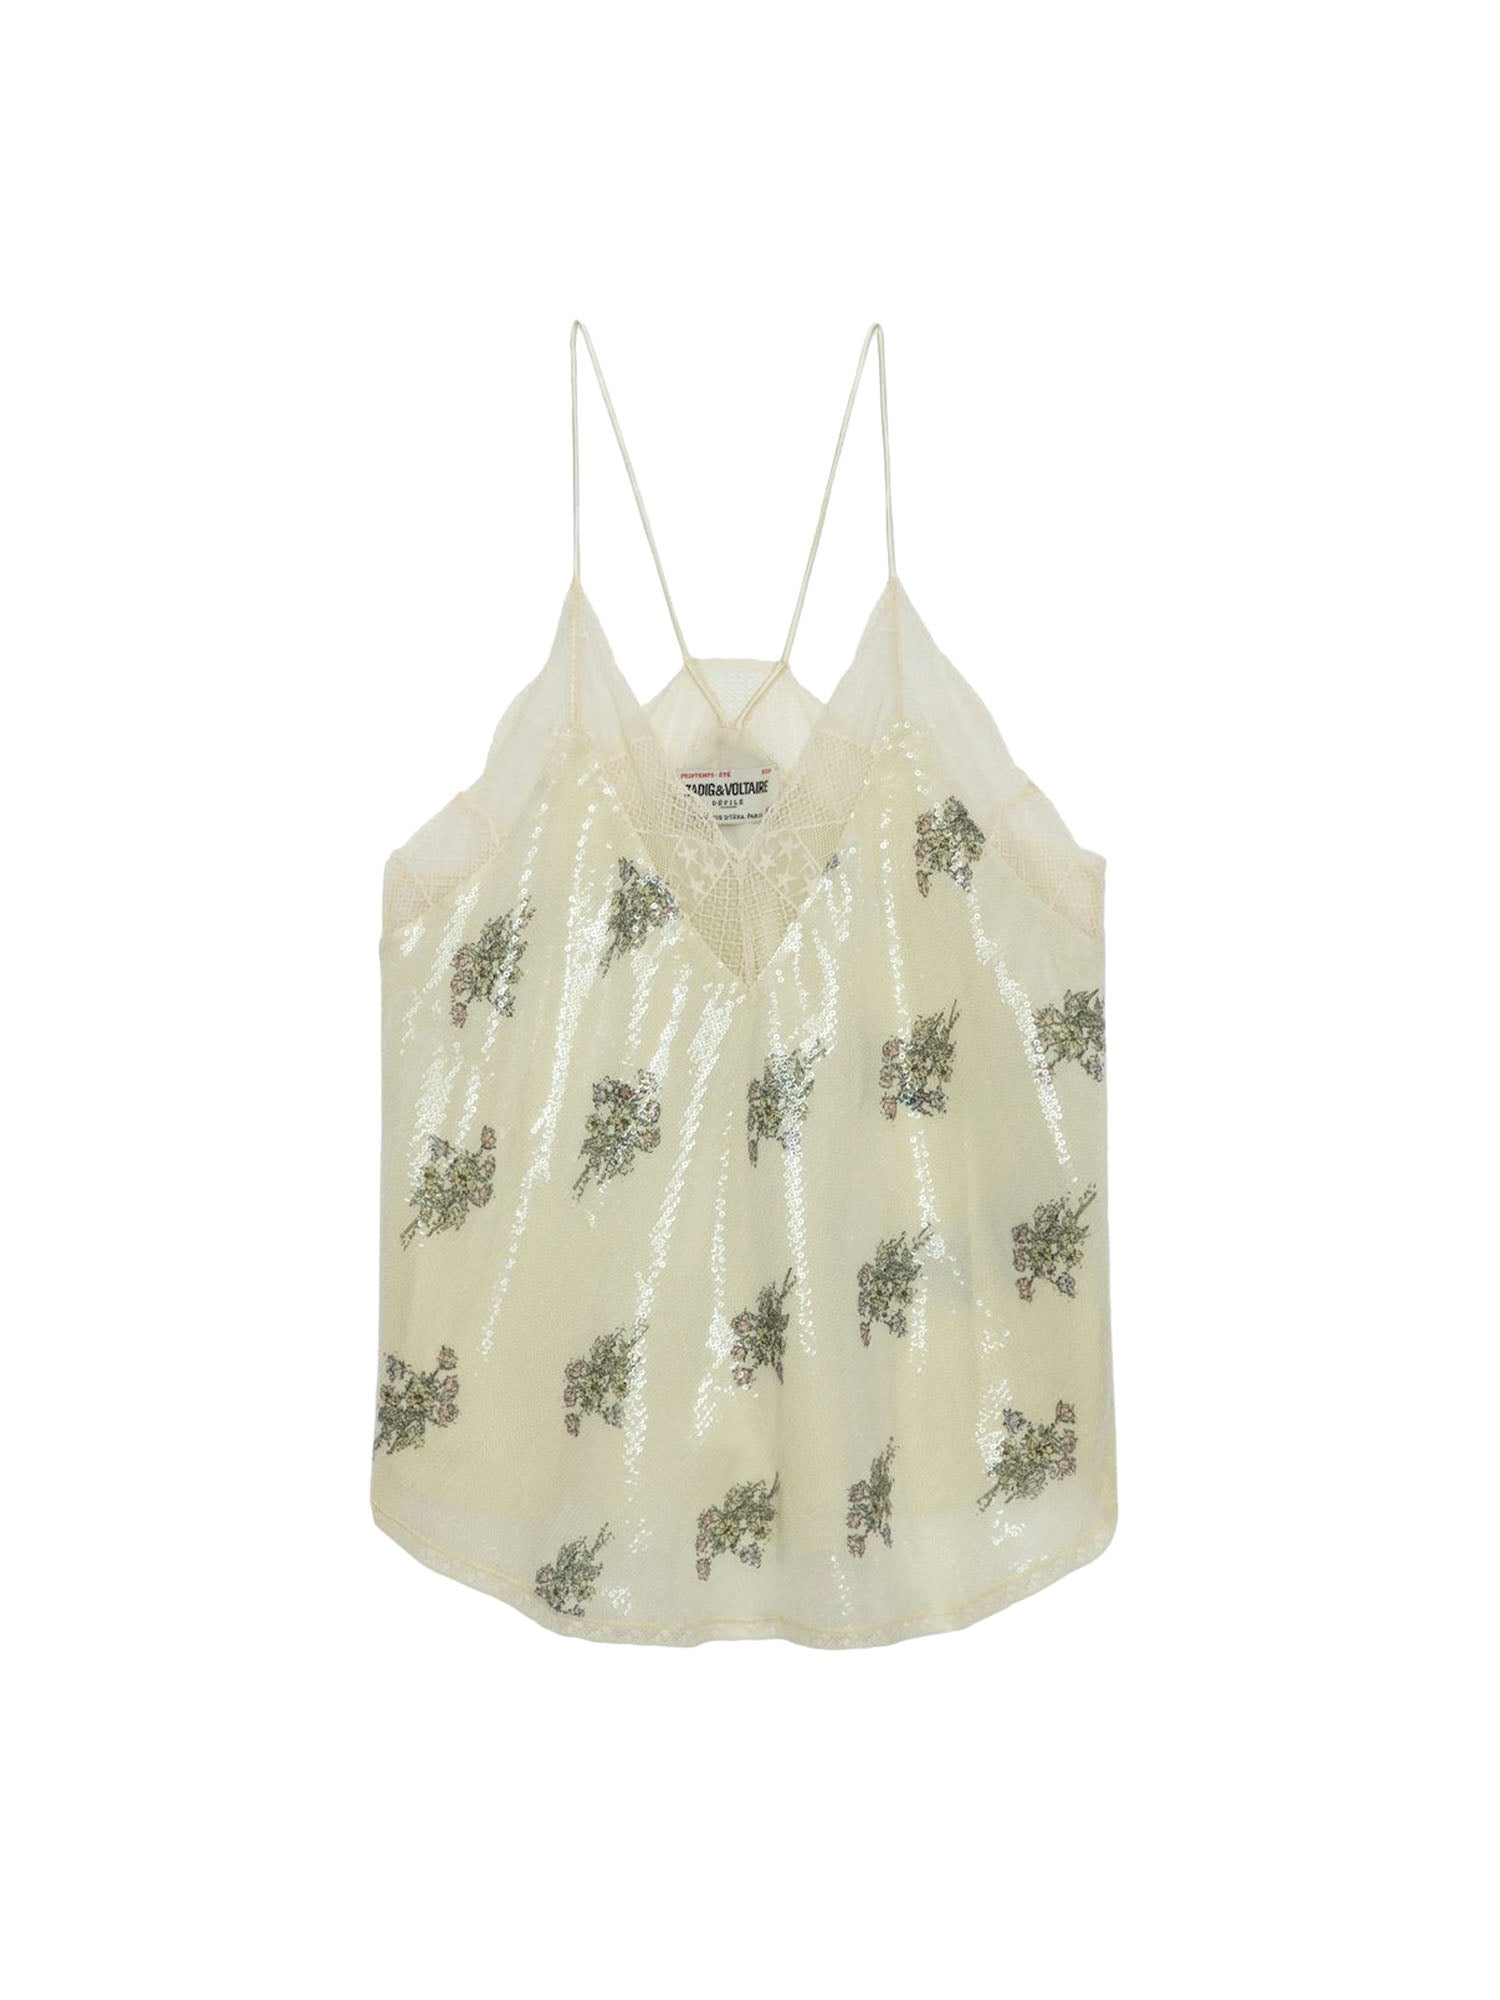 Zadig & Voltaire Christy Sequin Flowers Camisole